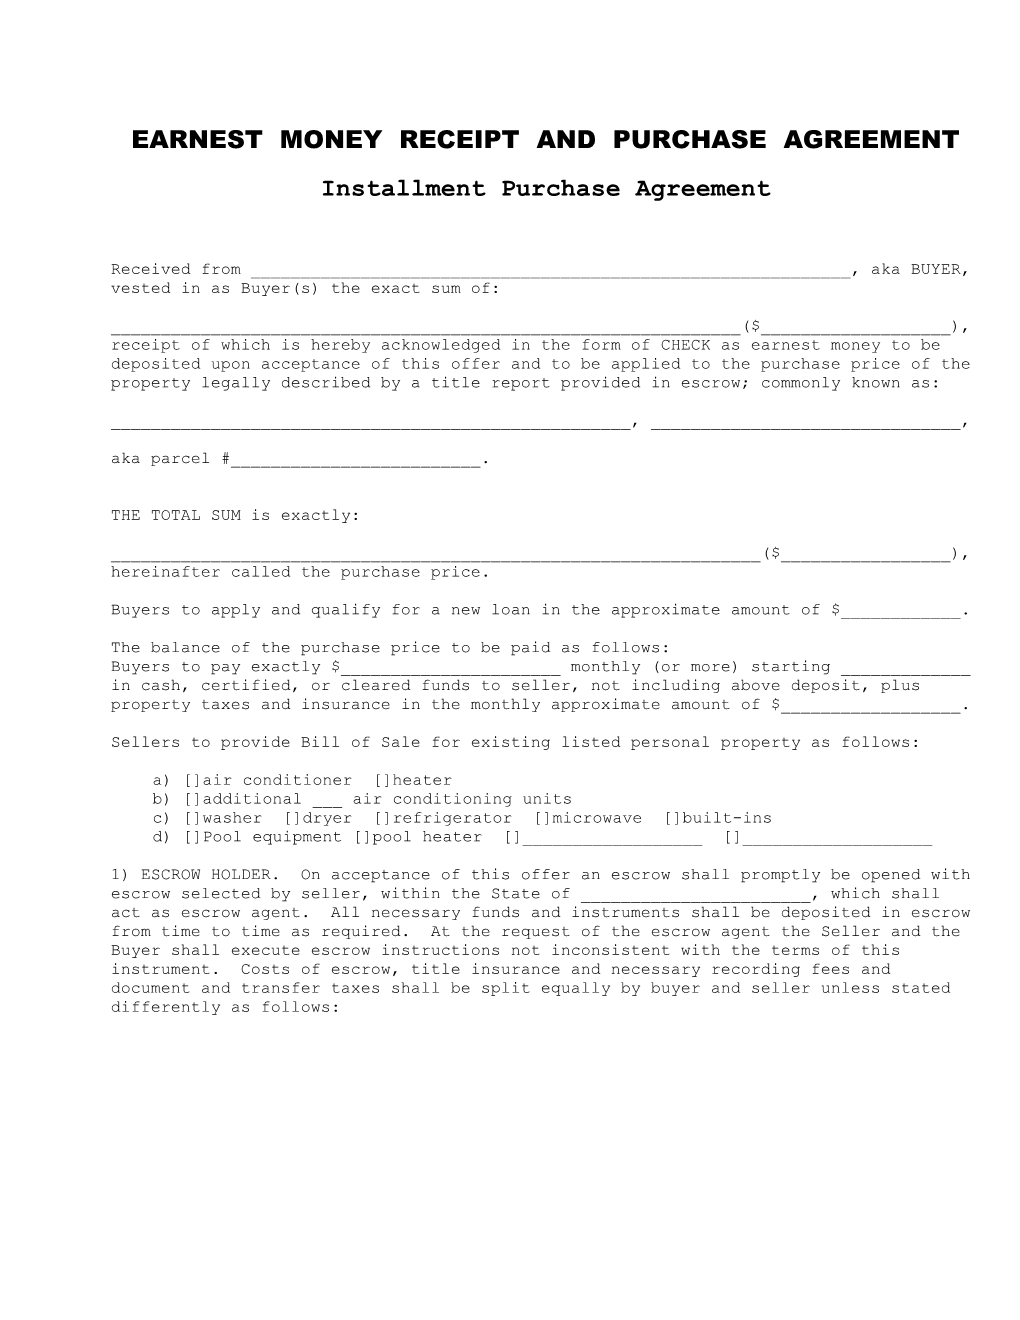 Earnest Money Receipt And Purchase Agreement